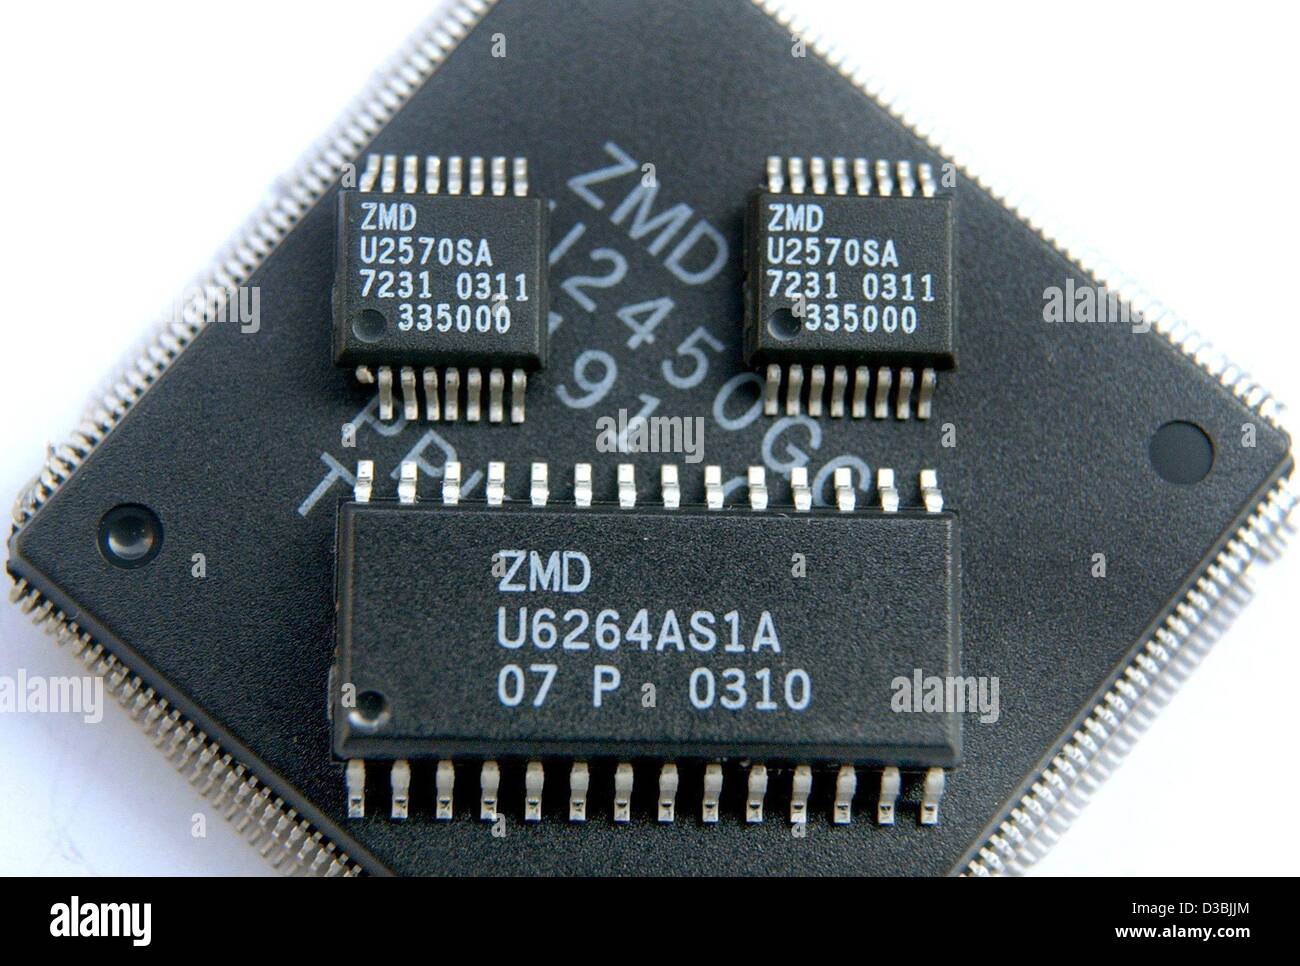 (dpa) - Standard circuits for computer chips of the chip manufacturer ZMD (Zentrum Mikroelektronik Dresden) are pictured in Dresden, Germany, 25 March 2003. ZMD mainly produces integrated circuits for automotive and industrial electronics, for medical technics and for infrared transmission as used i Stock Photo